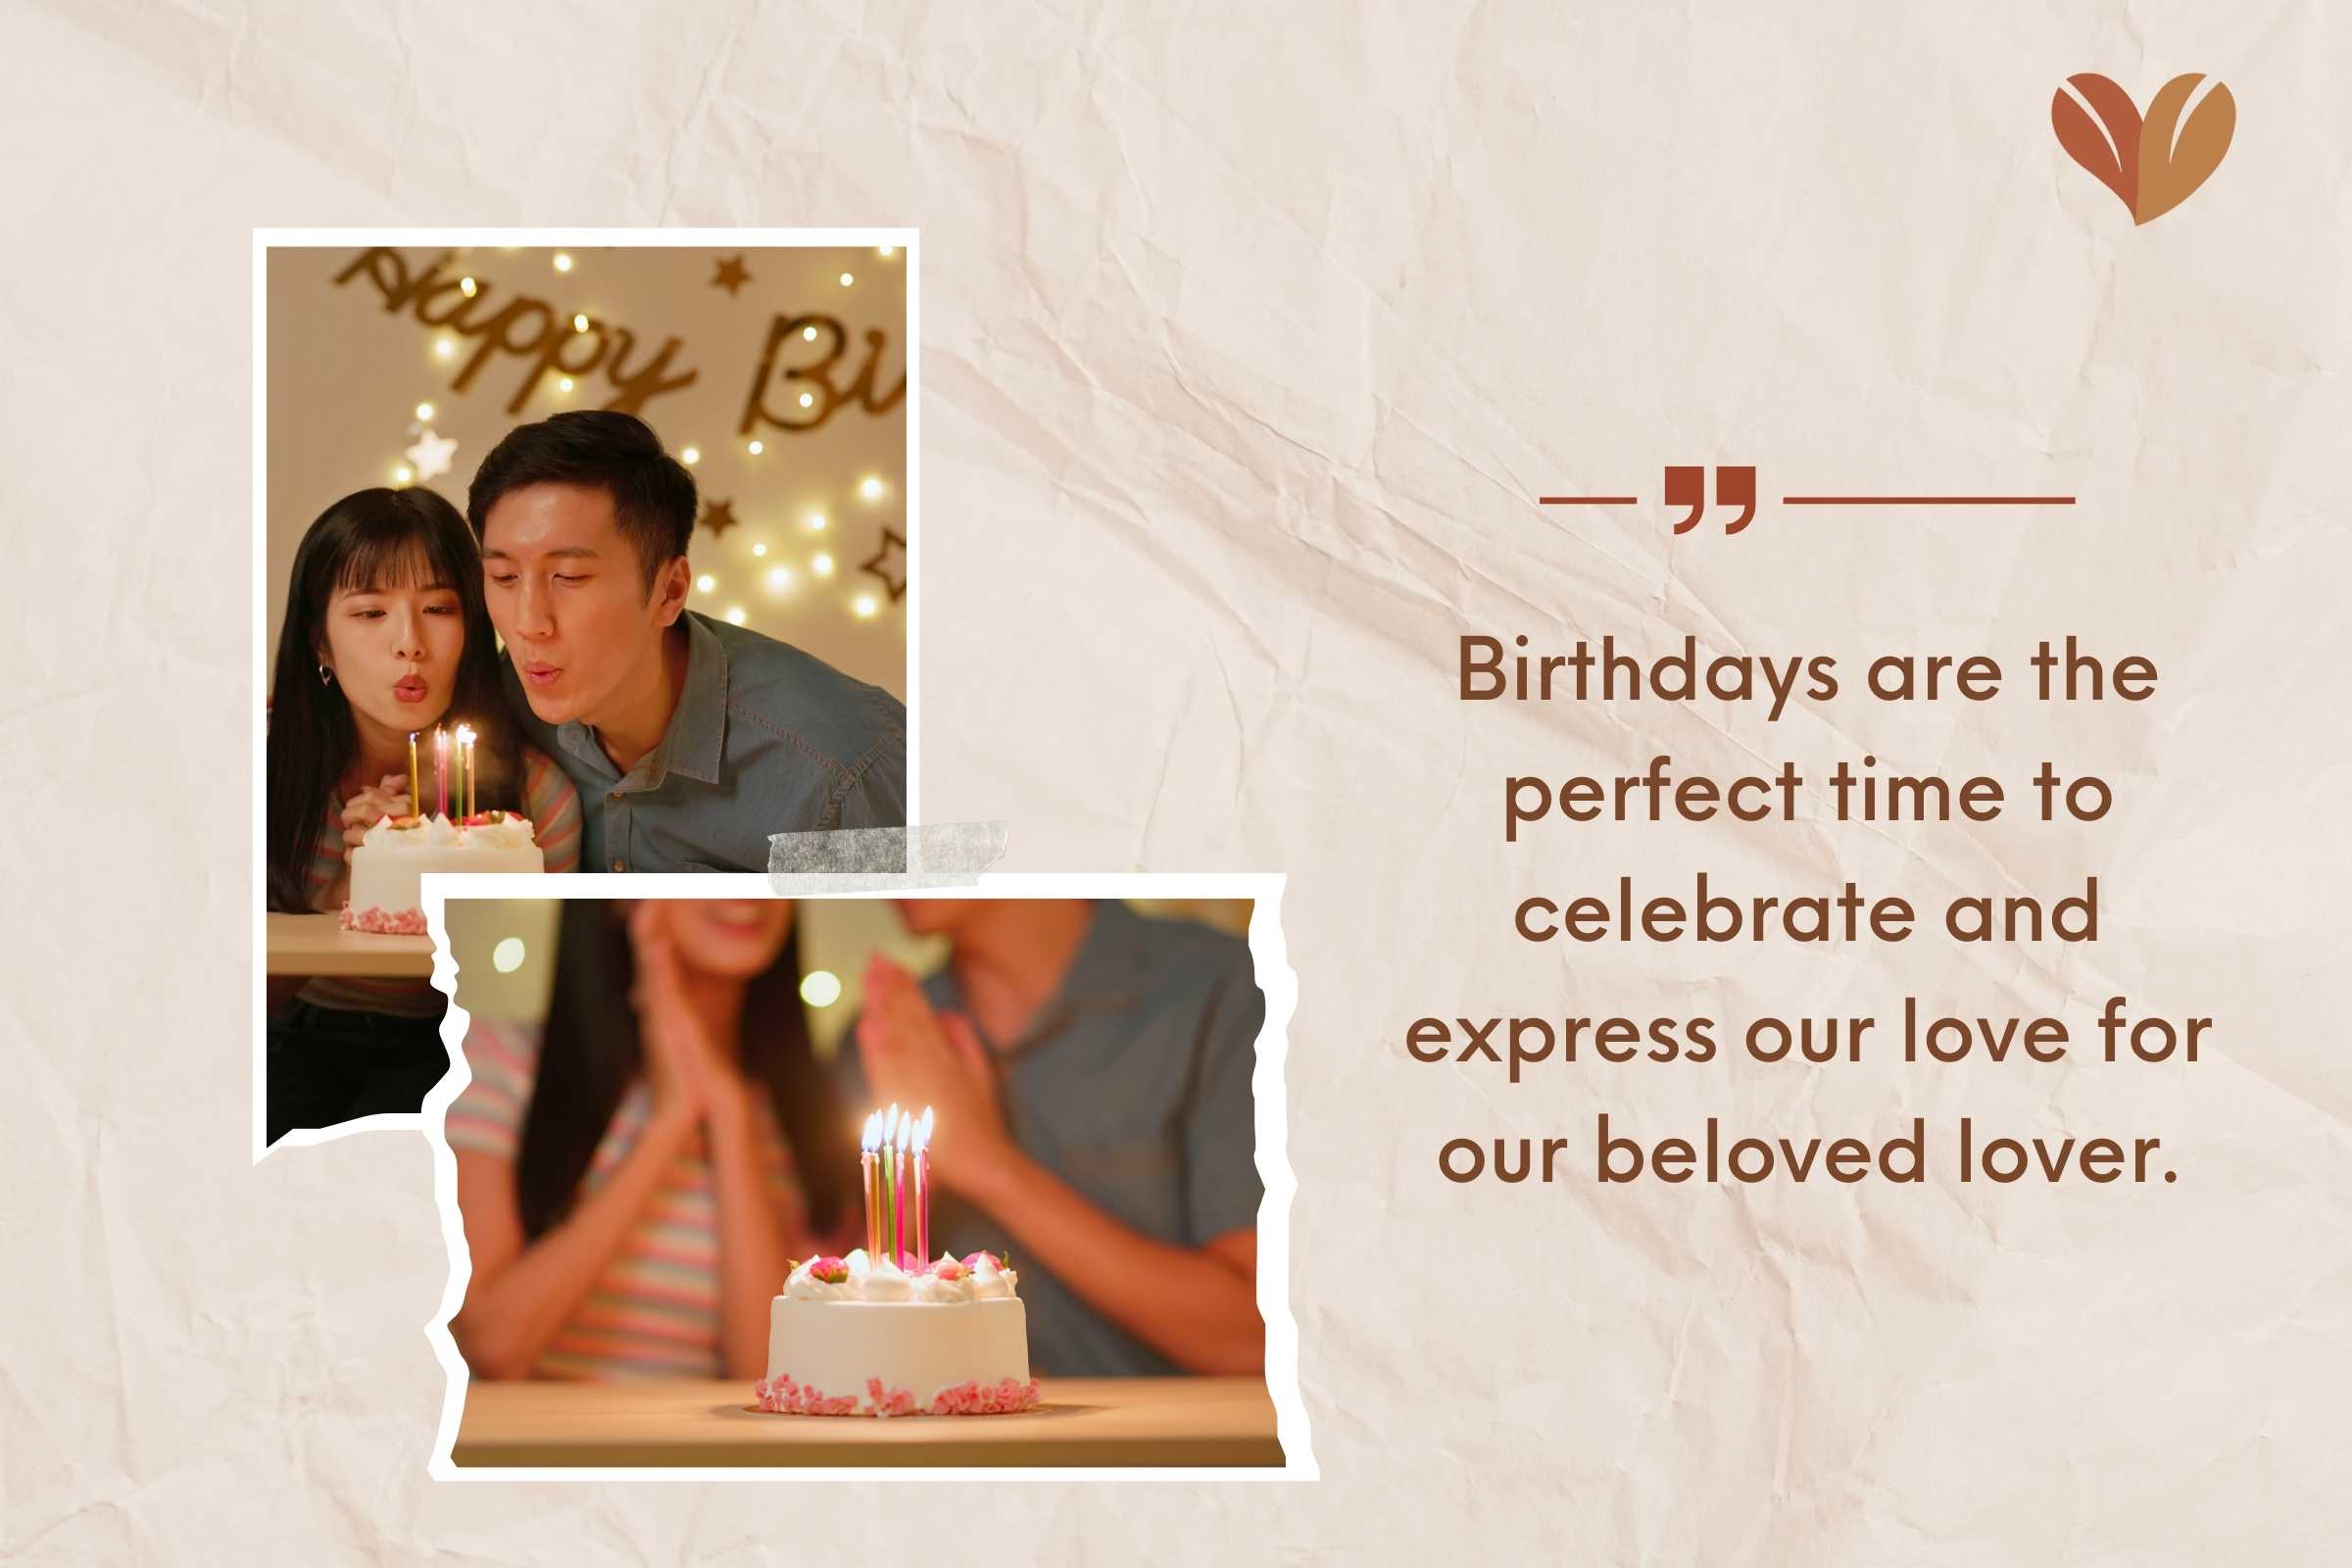 Sharing the joy of a loved one's day with 'happy birthday my world' wishes and laughter.